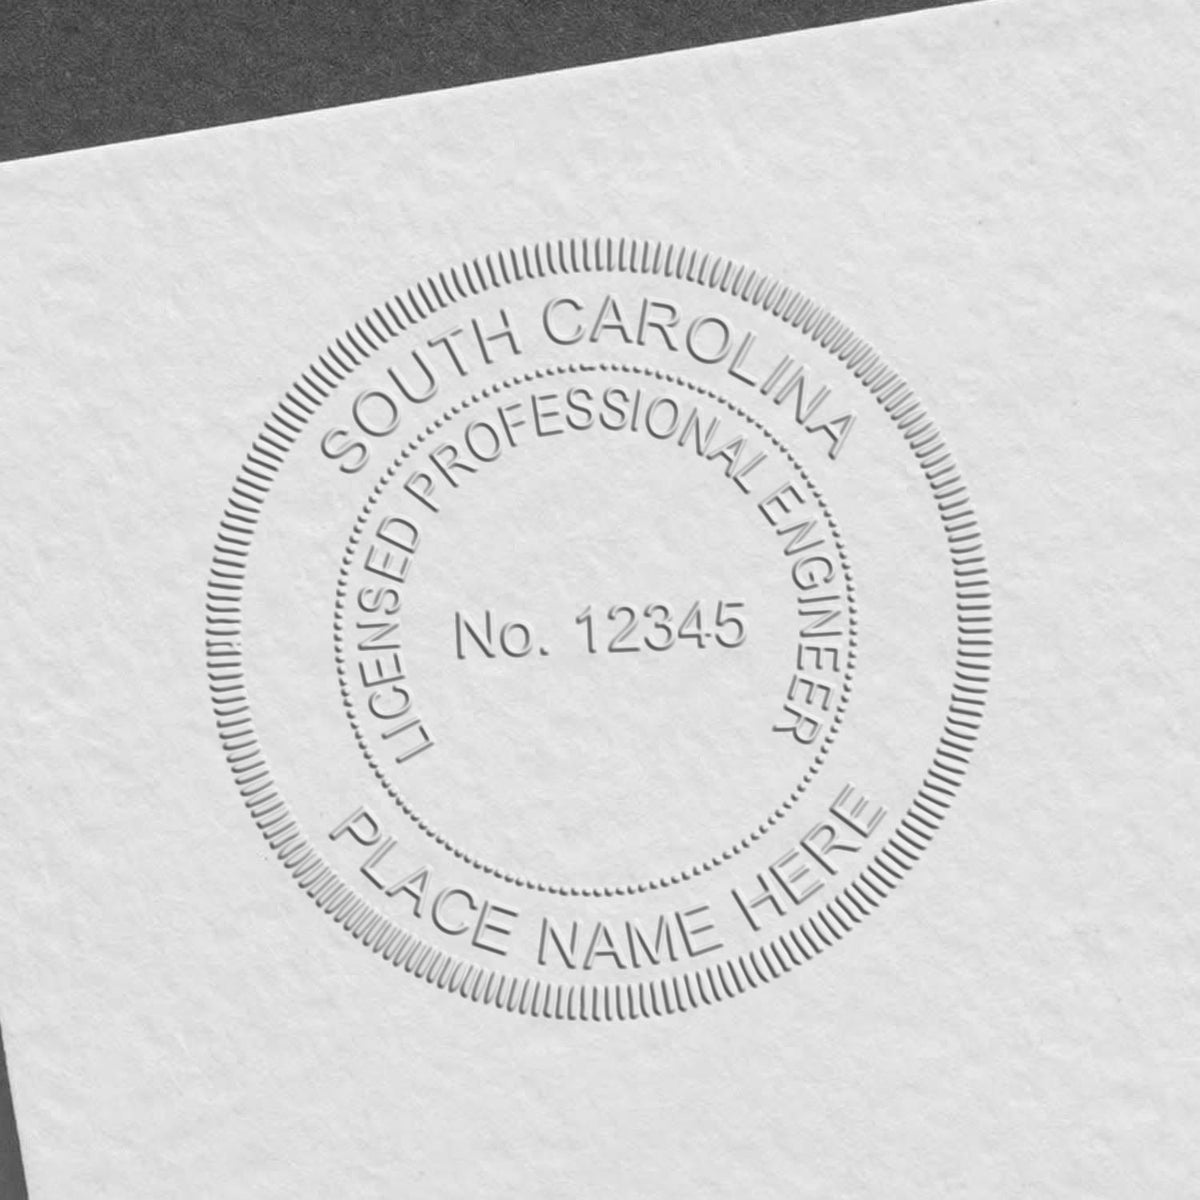 A photograph of the Hybrid South Carolina Engineer Seal stamp impression reveals a vivid, professional image of the on paper.